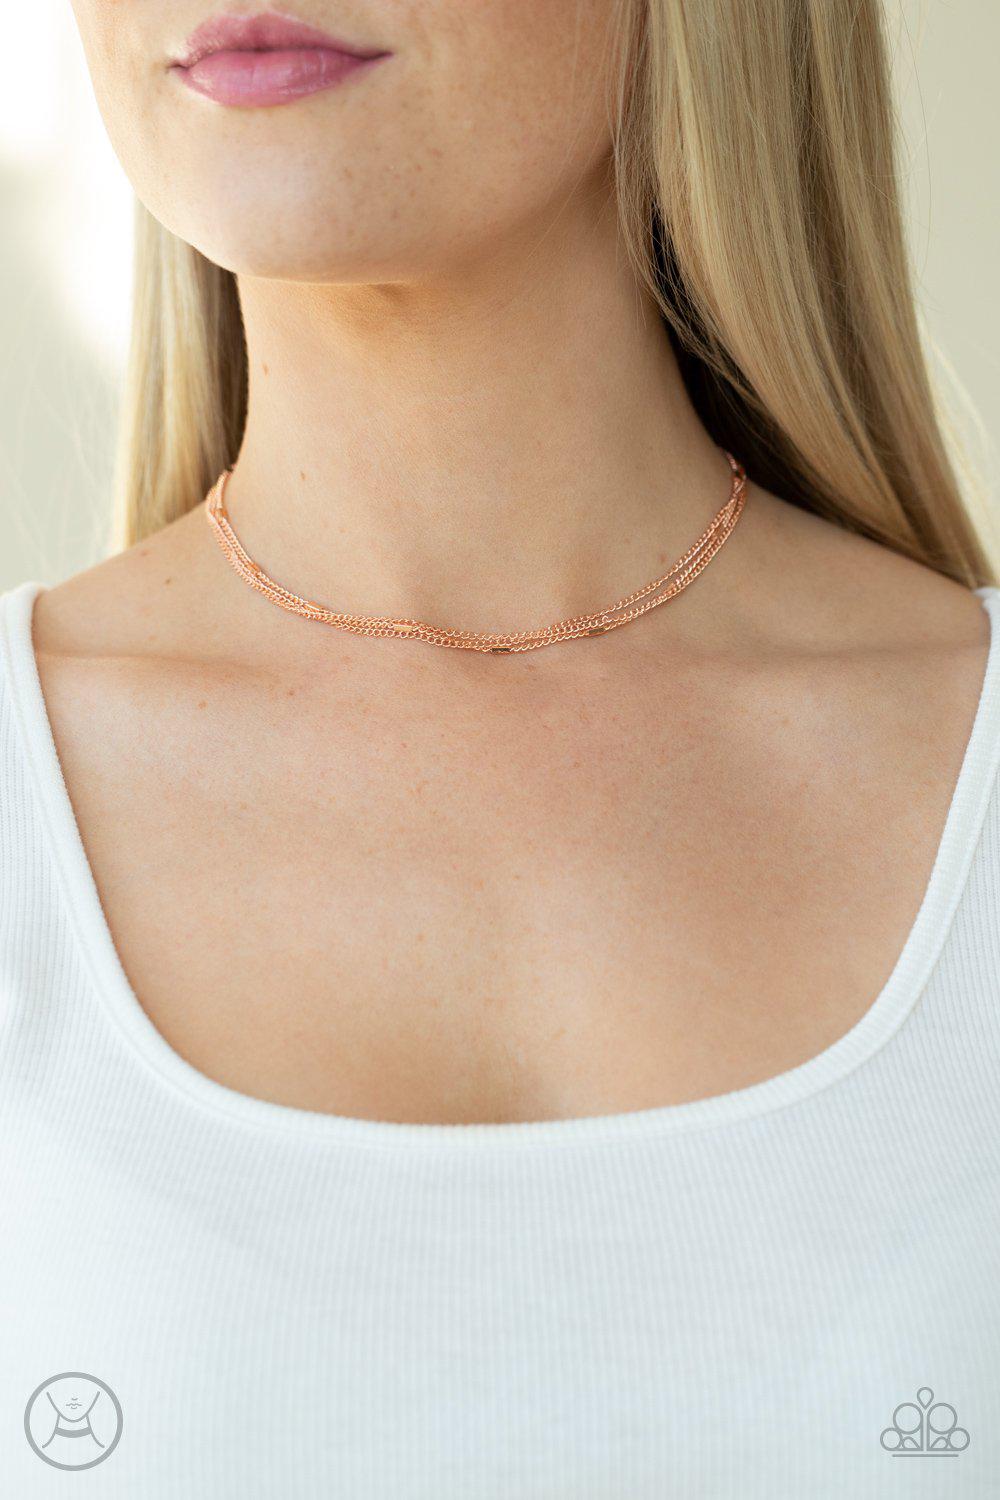 Need I SLAY More Copper Choker Necklace - Paparazzi Accessories - model -CarasShop.com - $5 Jewelry by Cara Jewels